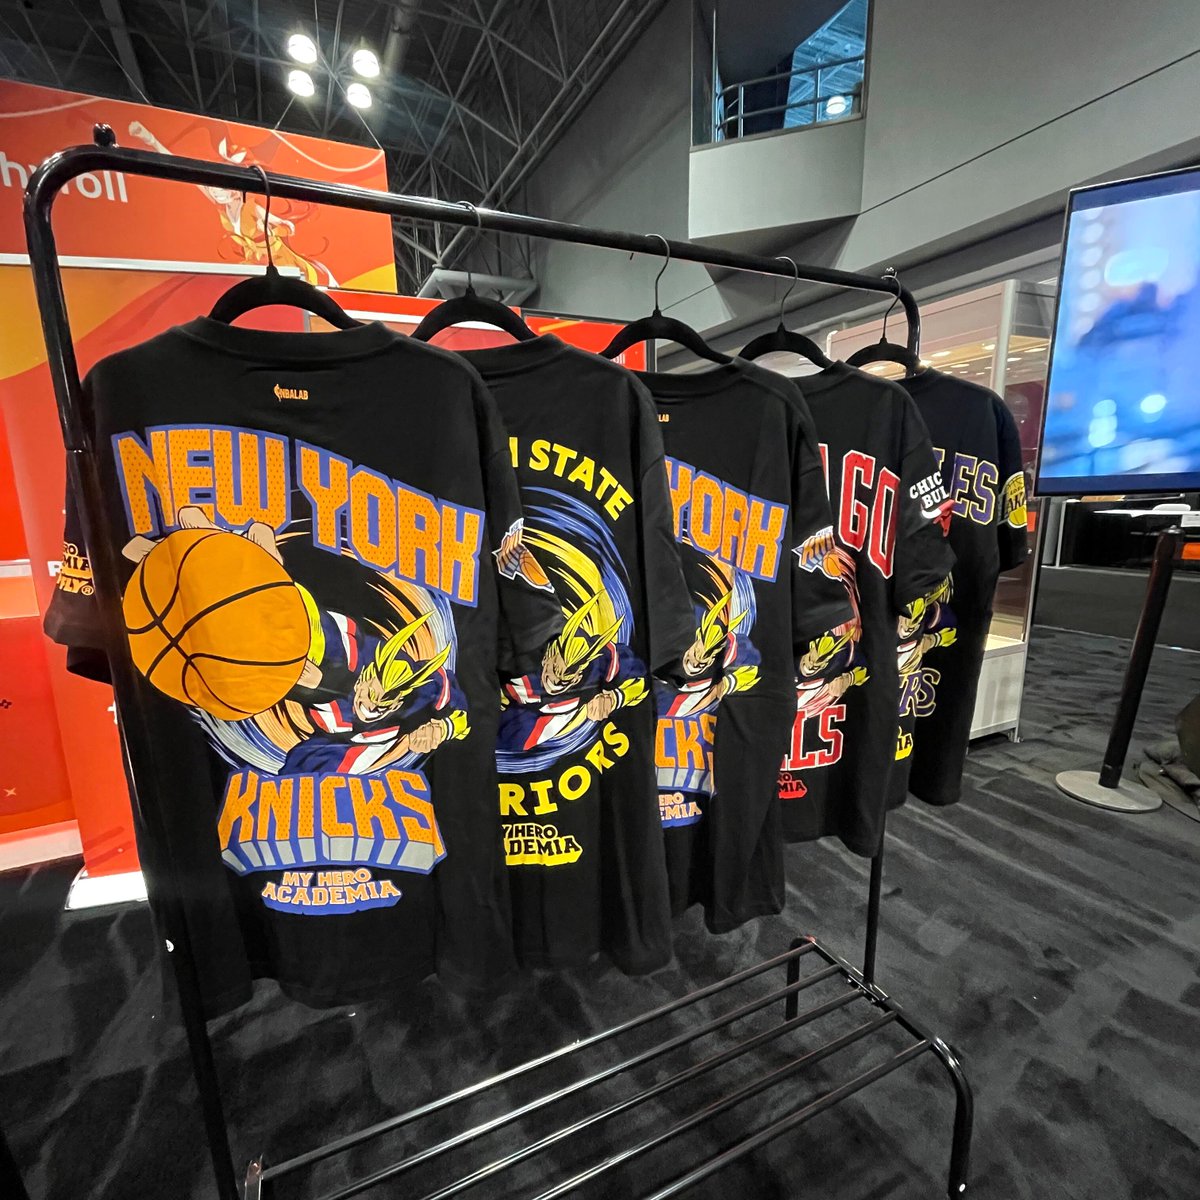 Now's your chance to get Limited Edition @MHAOfficial x @NBA collab t-shirts by @hyperfly at our booth at #NYCC2023! 🔥🏀 Stop by Booth #1653 before they're gone!